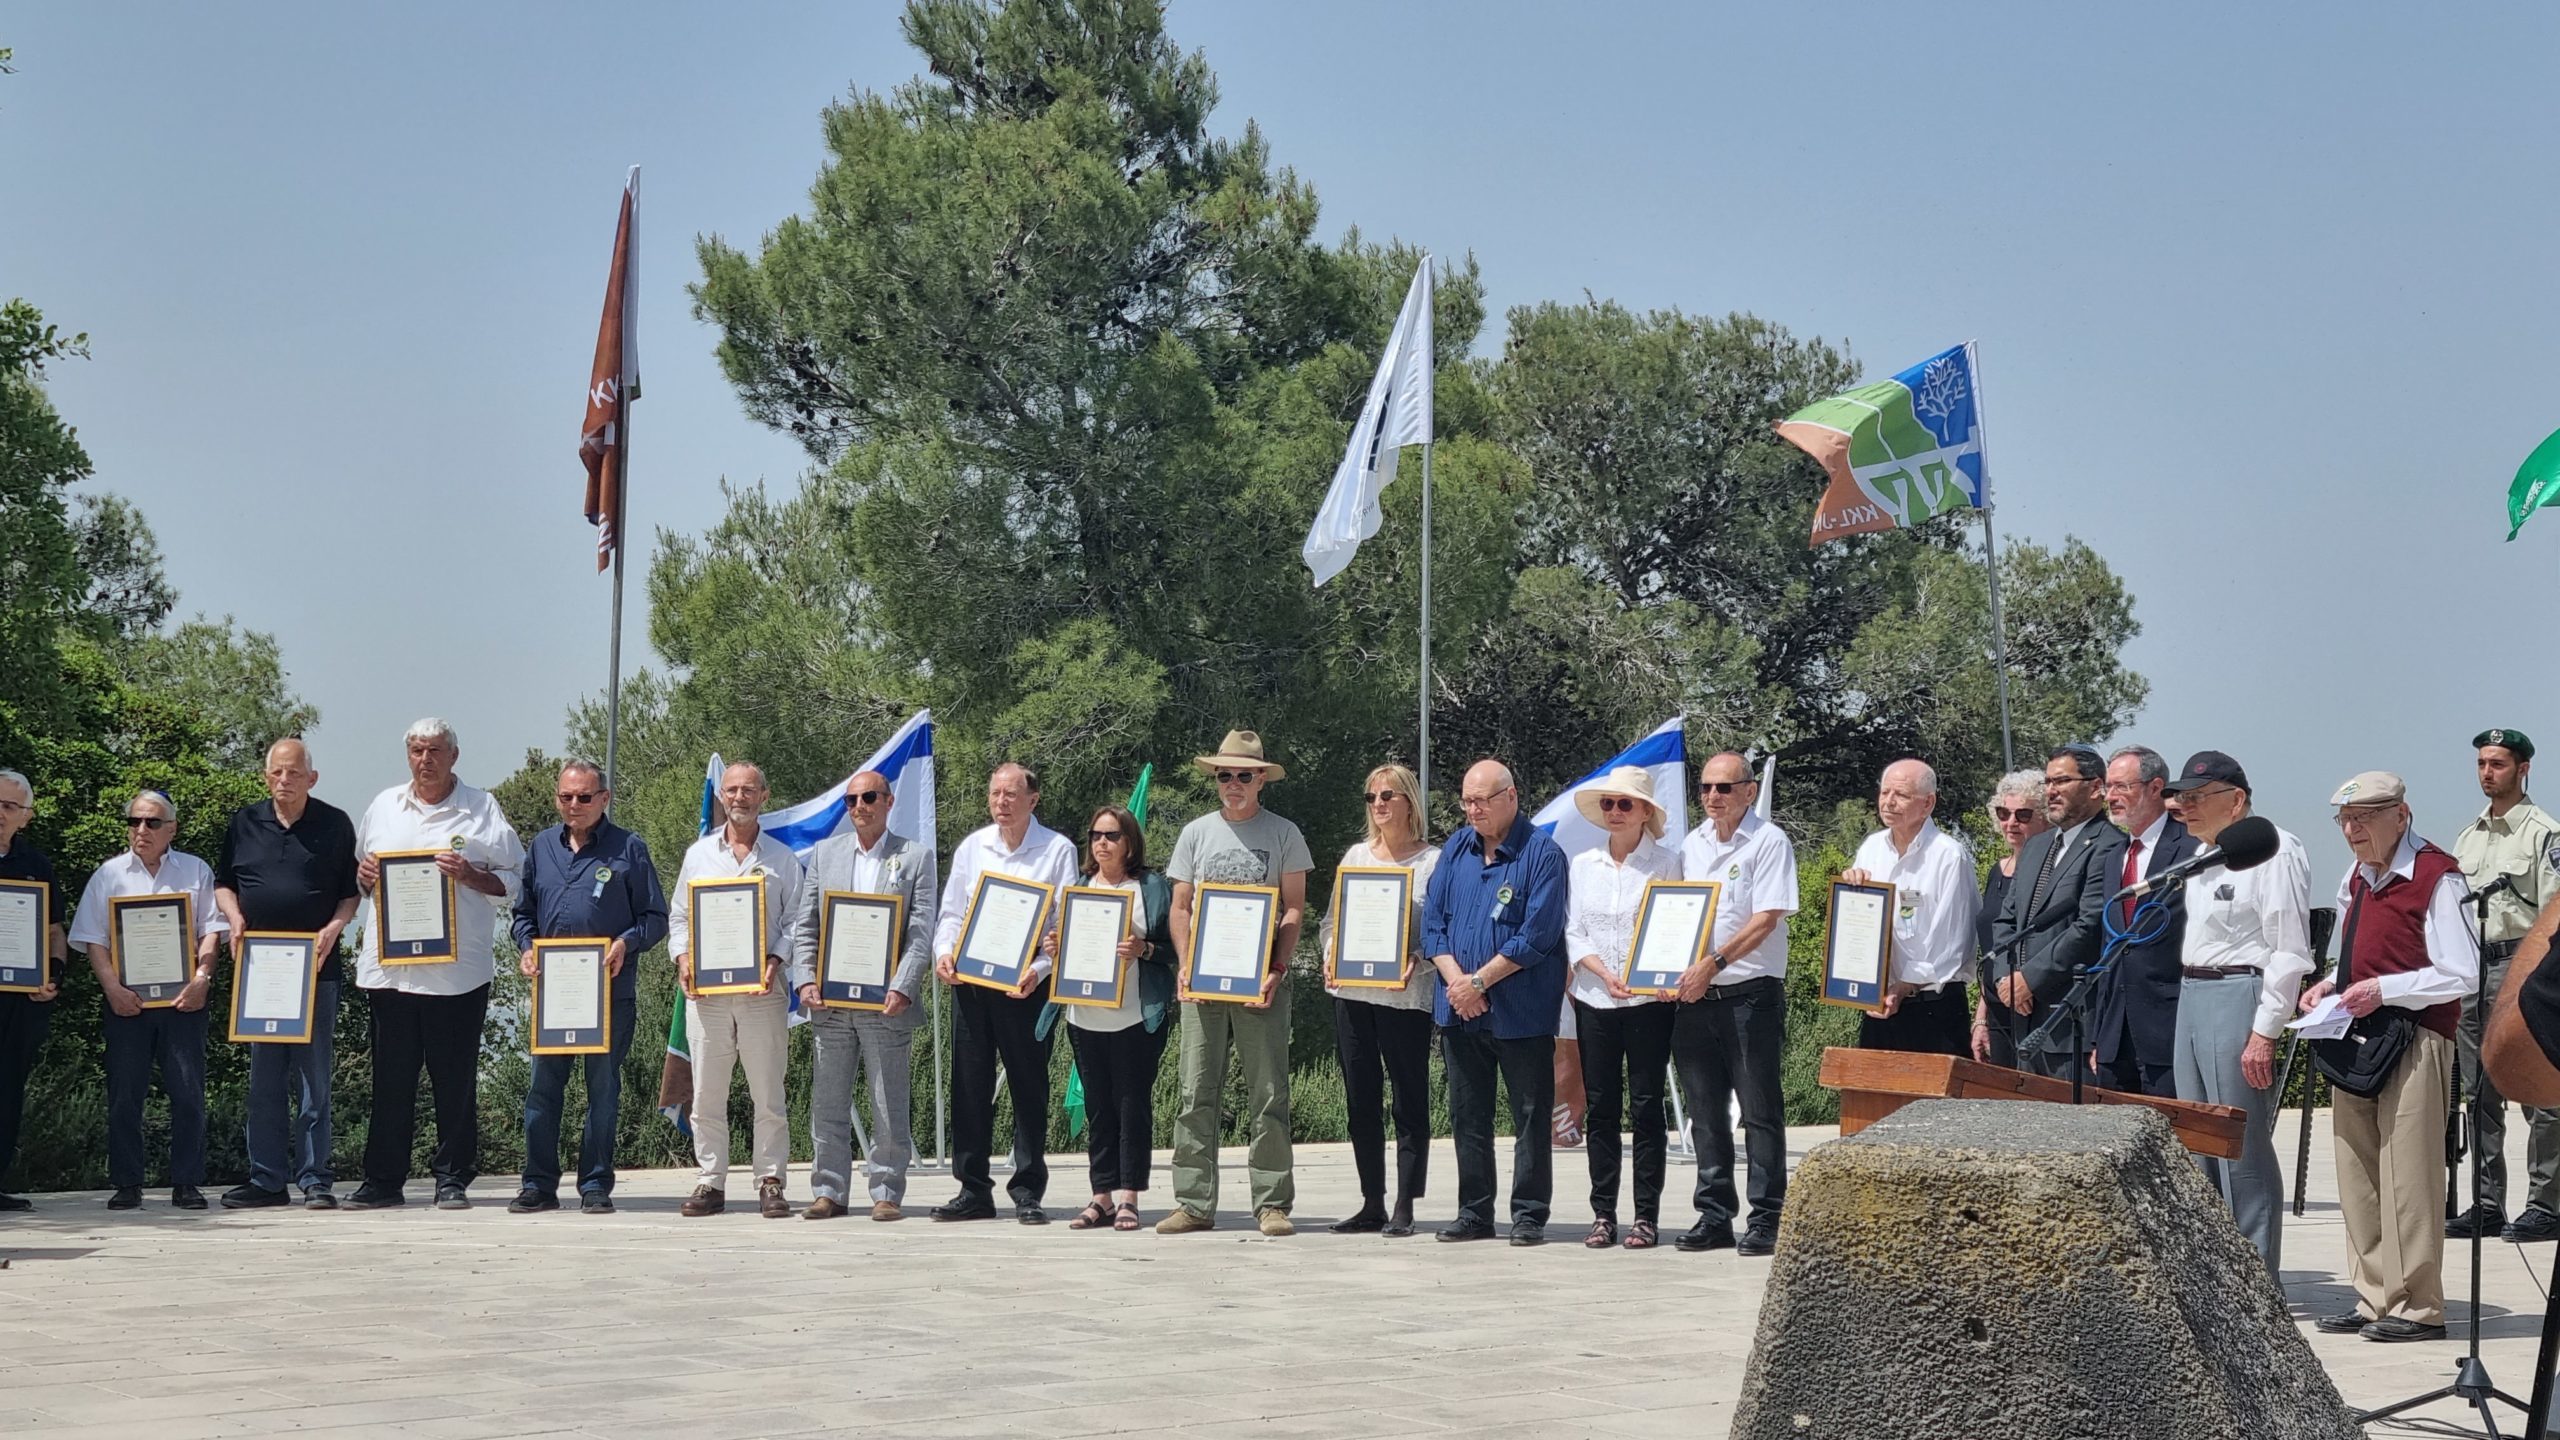 Ceremony Honors Jews Who Rescued Jews During Holocaust